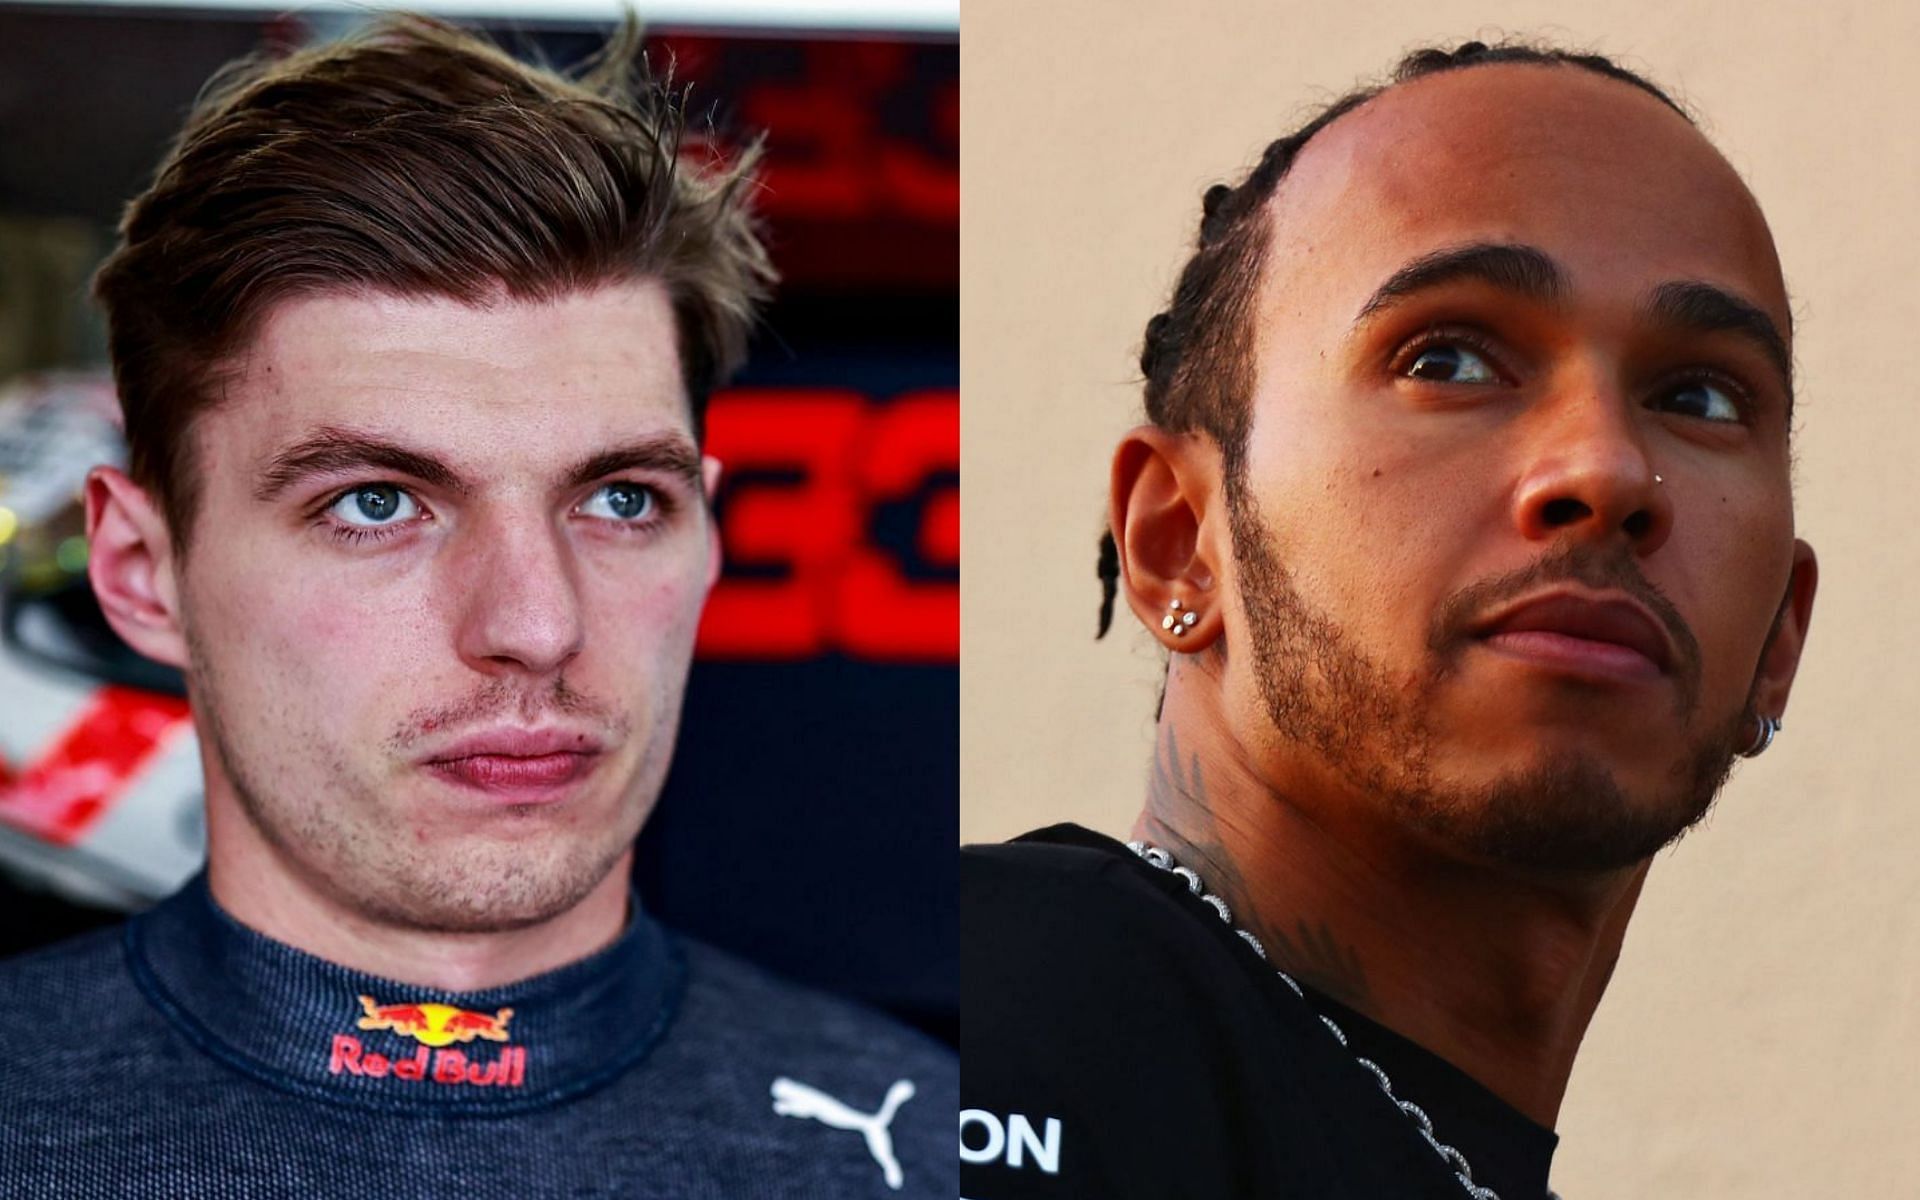 Max Verstappen (left) and Lewis Hamilton (right) are expected to resume their rivalry in 2022, following an intense title battle last season